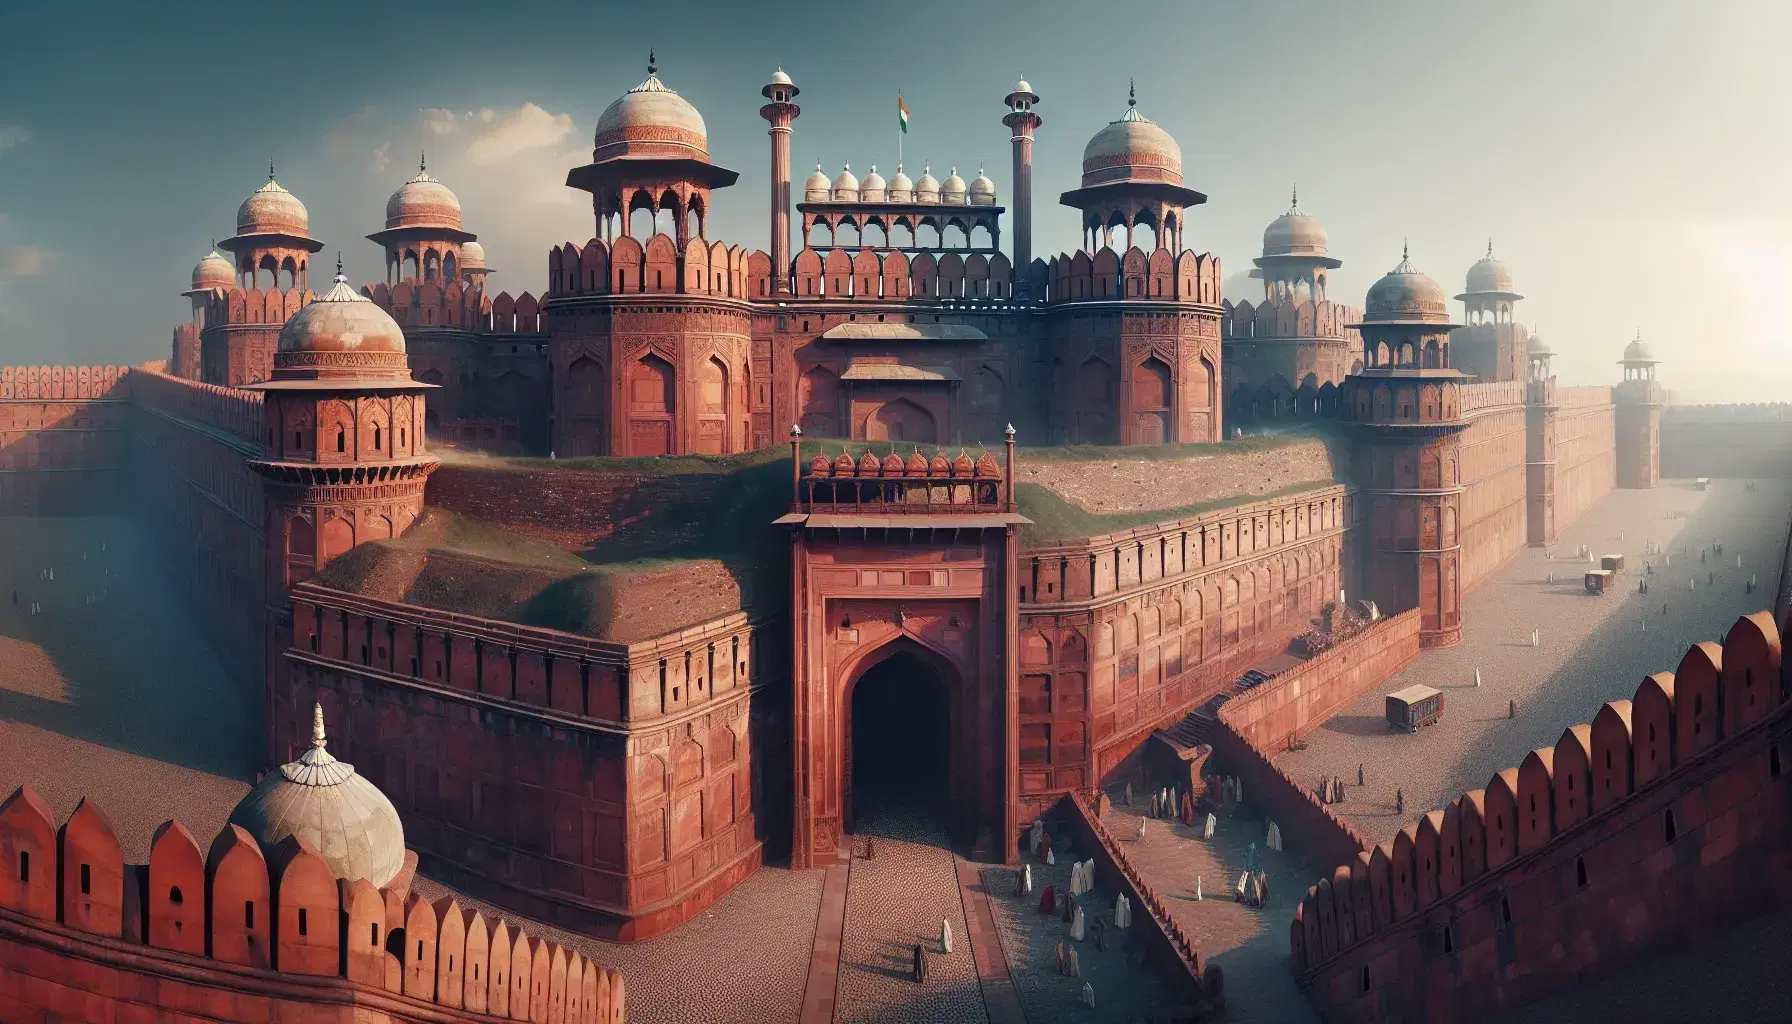 Panoramic view of Red Fort's red sandstone walls, Lahore Gate with stone elephants, and intricate Mughal architecture under a clear blue sky.